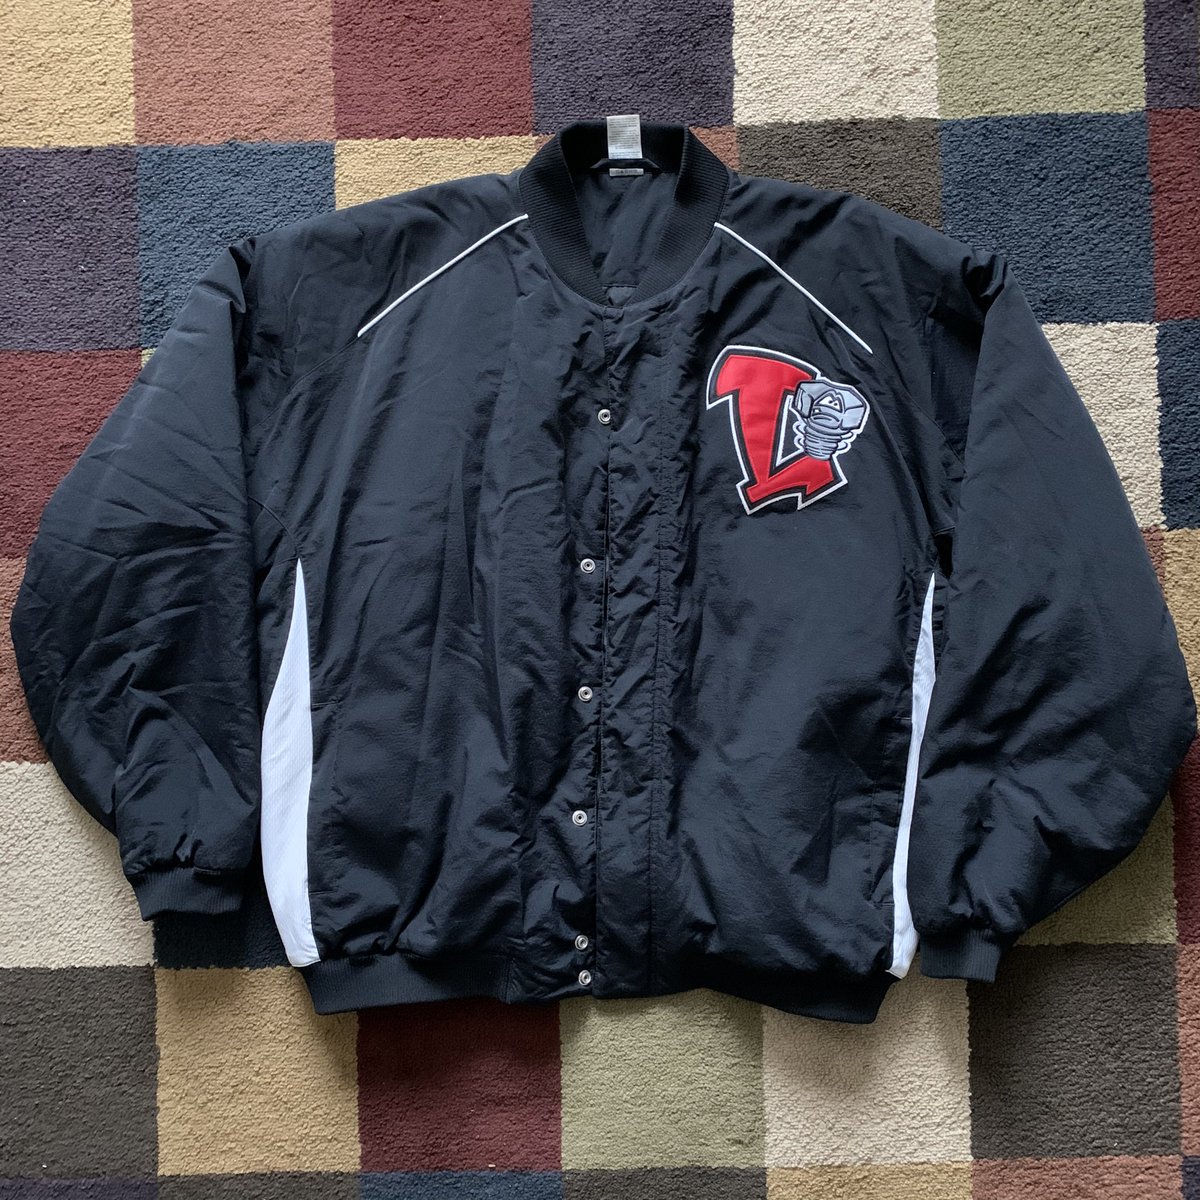 More  @LansingLugnuts gear, got this coat for $25, shoulda bought the other style too 